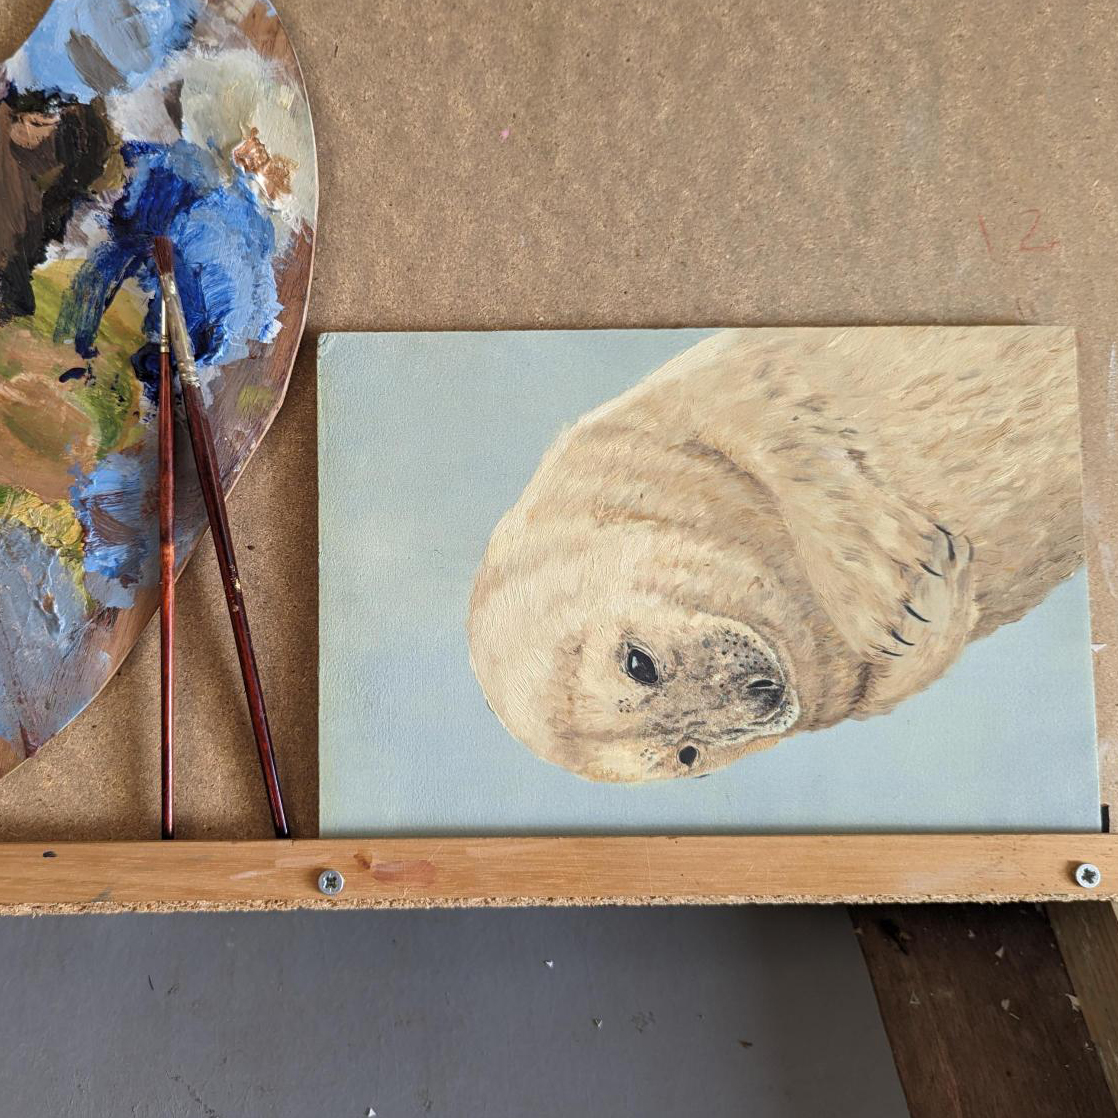 Fancy this seal painting in your home? 🖼🦭 Commission me to finish it & I'll donate 10% from the sale to the brave seal rescue dive team at @BDMLR 🤿 ✉mail@robertefuller.com if you are interested